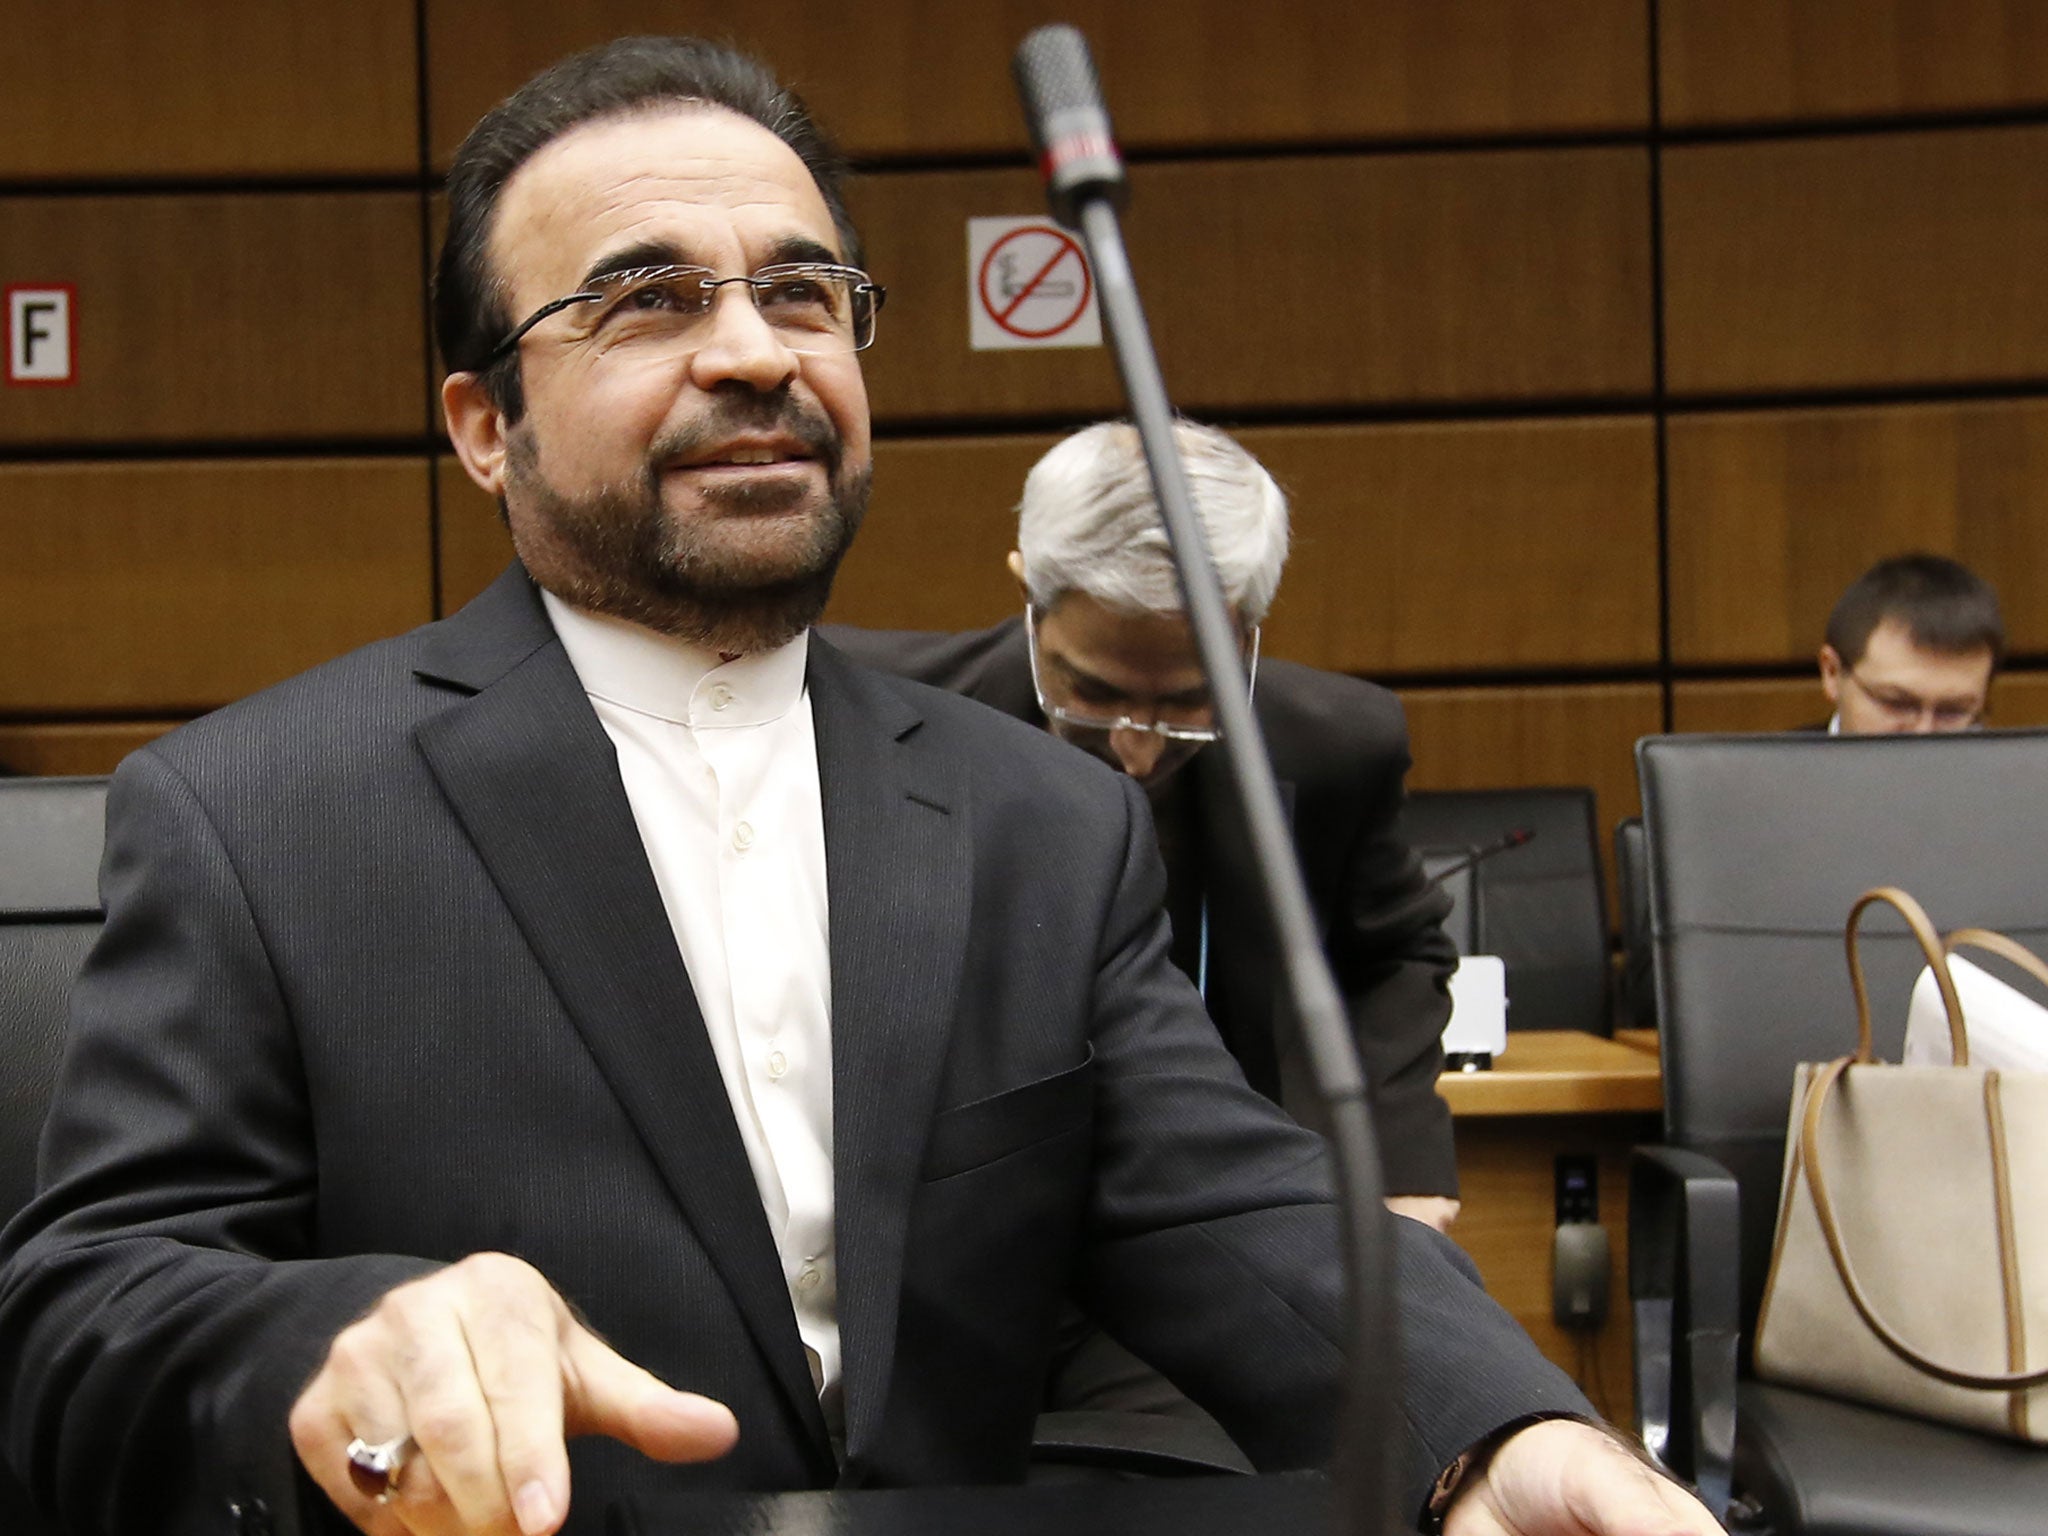 Iran's ambassador to the International Atomic Energy Agency (IAEA) Reza Najafi is pictured at the Board of Governors meeting at the UN atomic agency headquarters in Vienna, Austria.